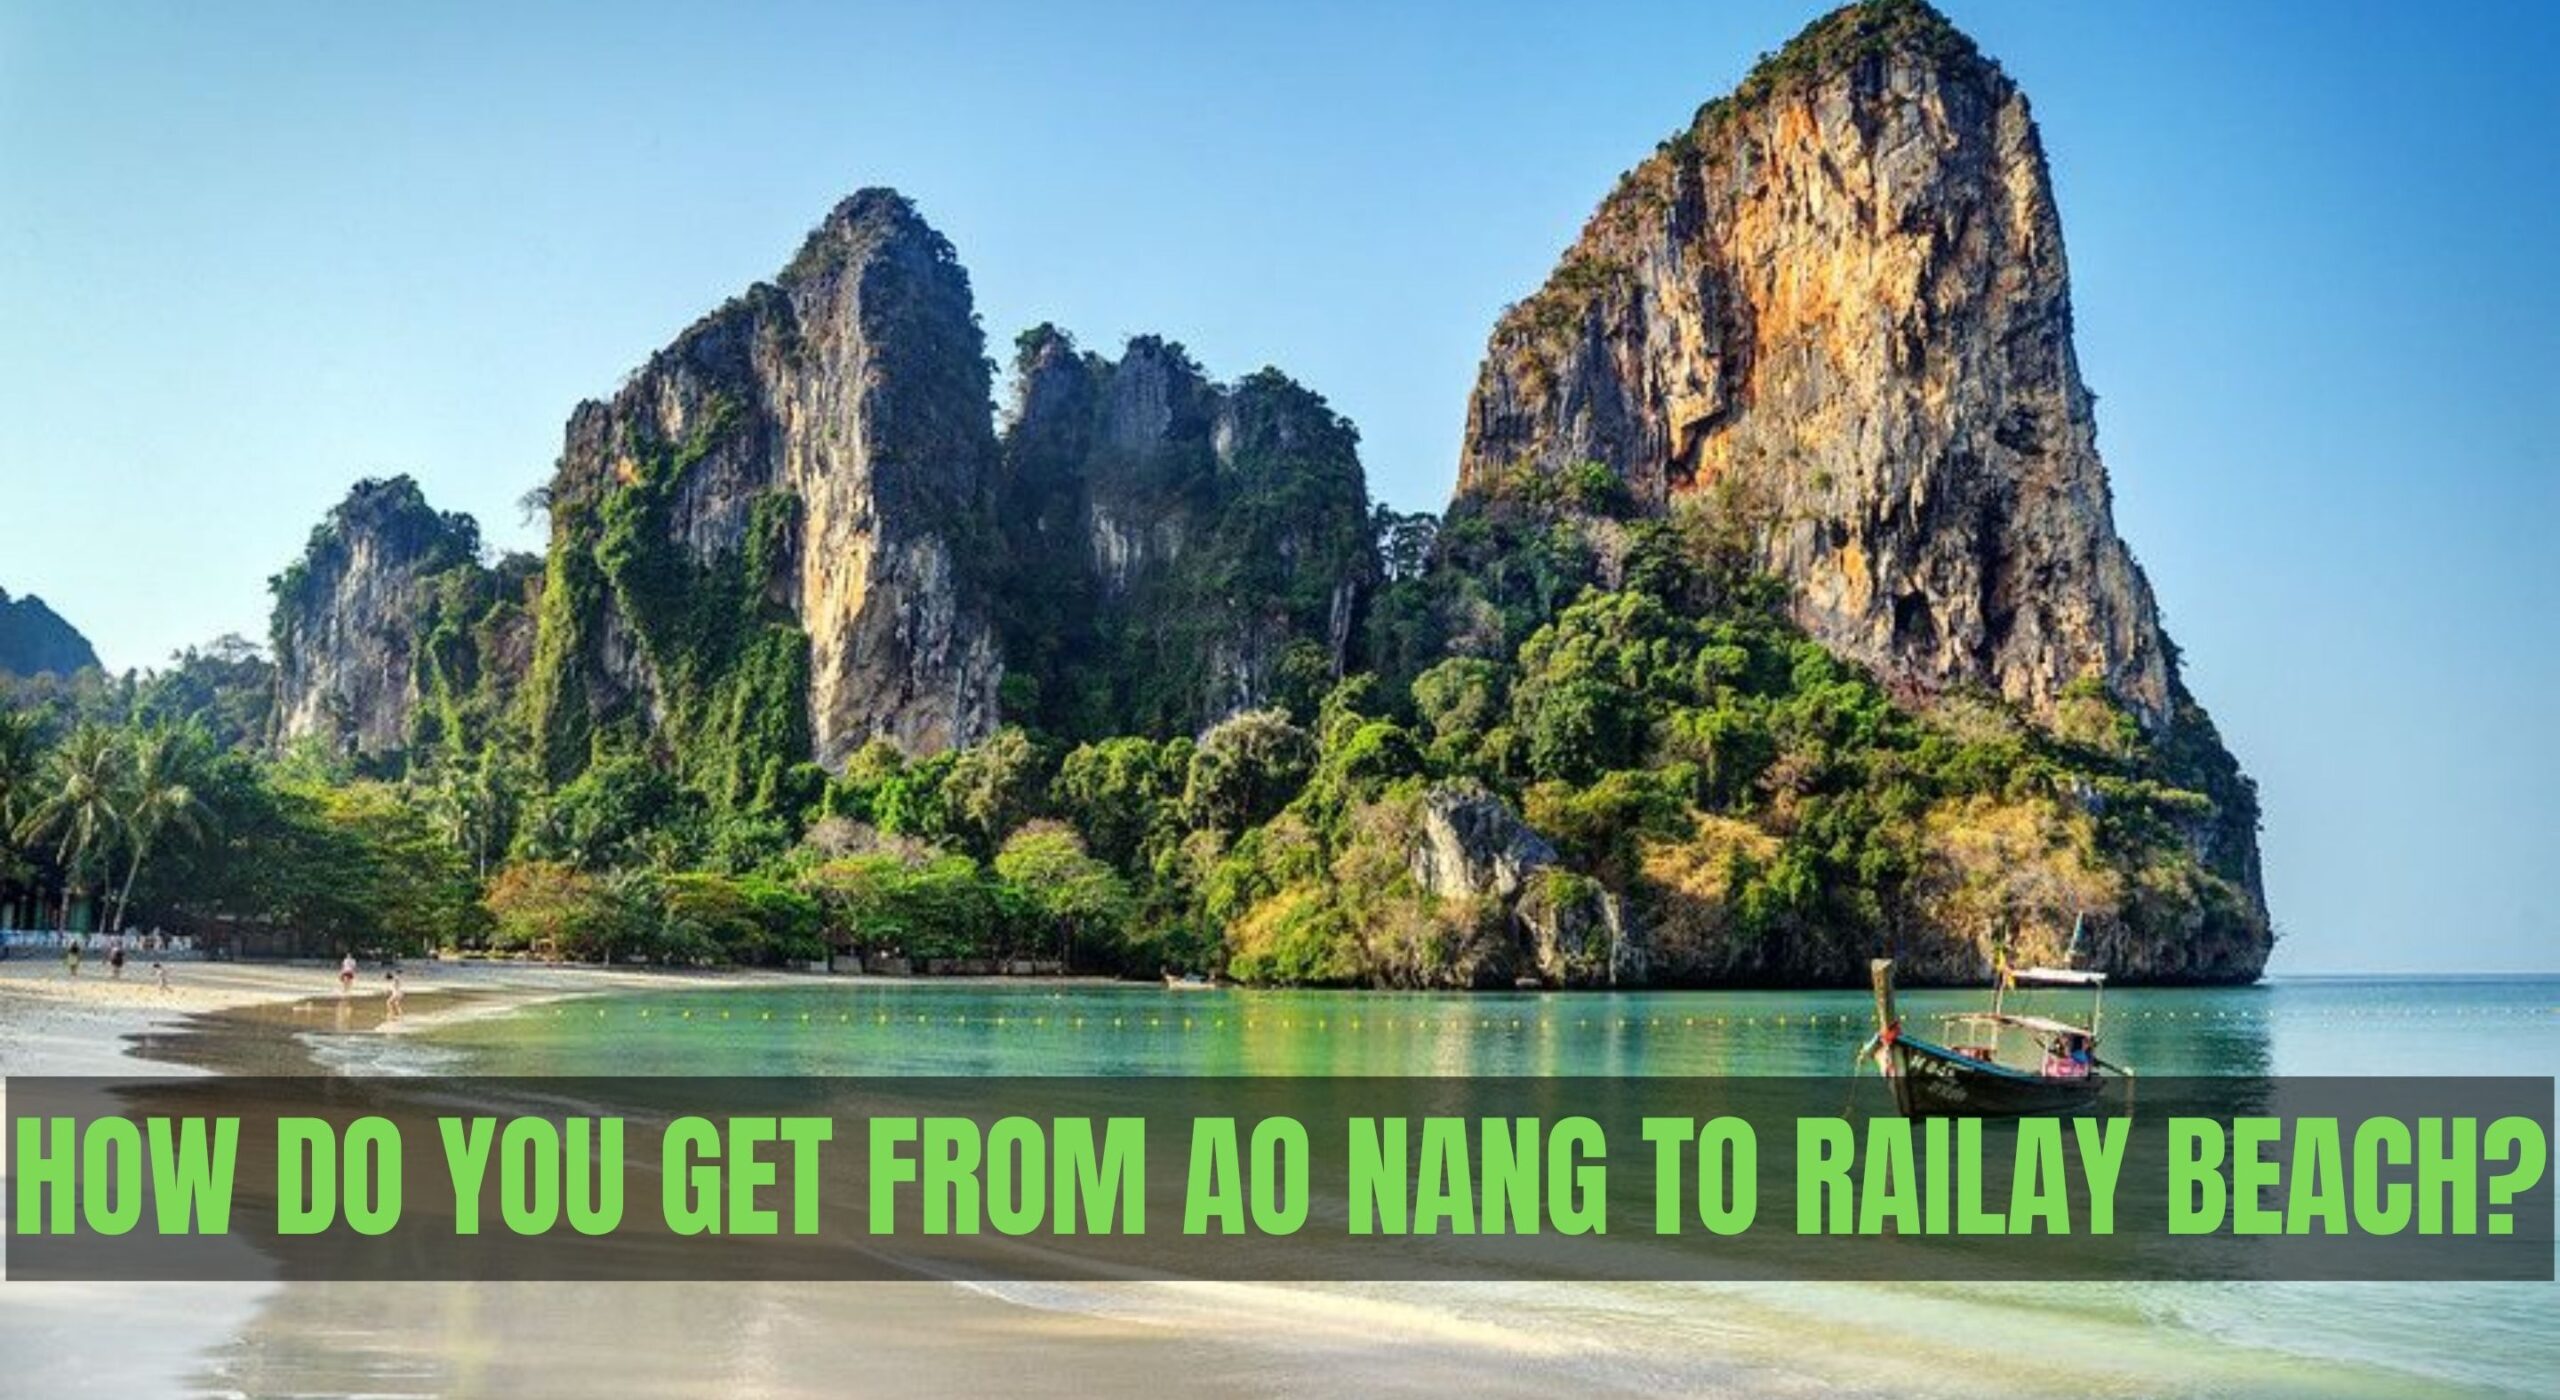 How Do You Get From Ao Nang to Railay Beach?